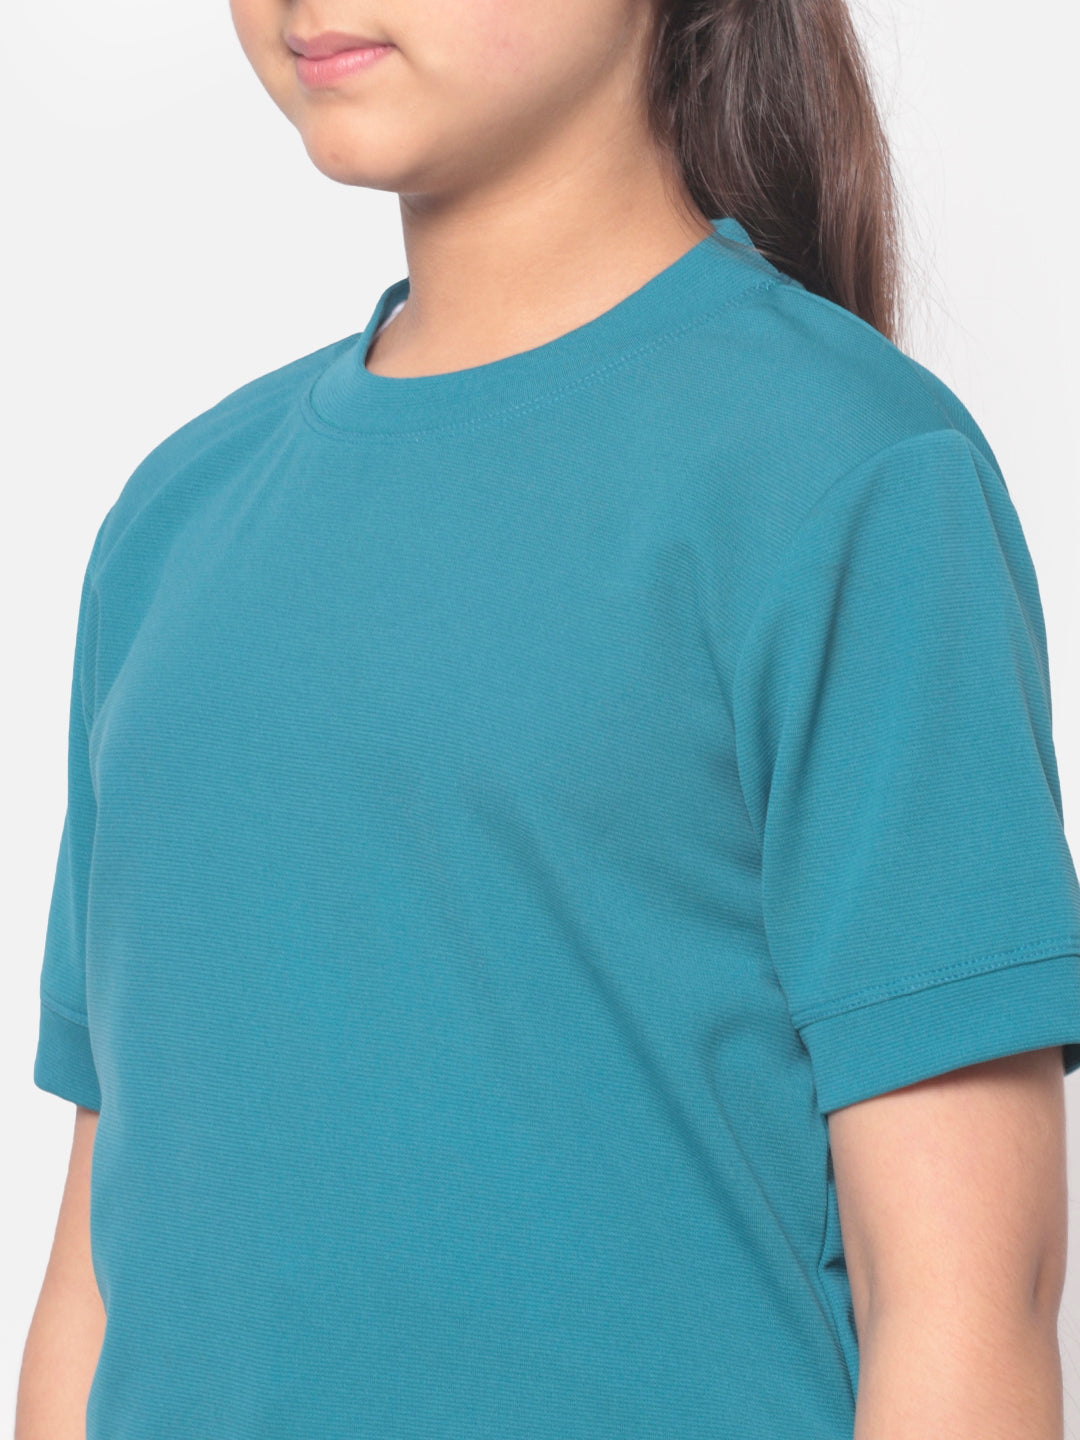 MINOS Turquoise Solid Top